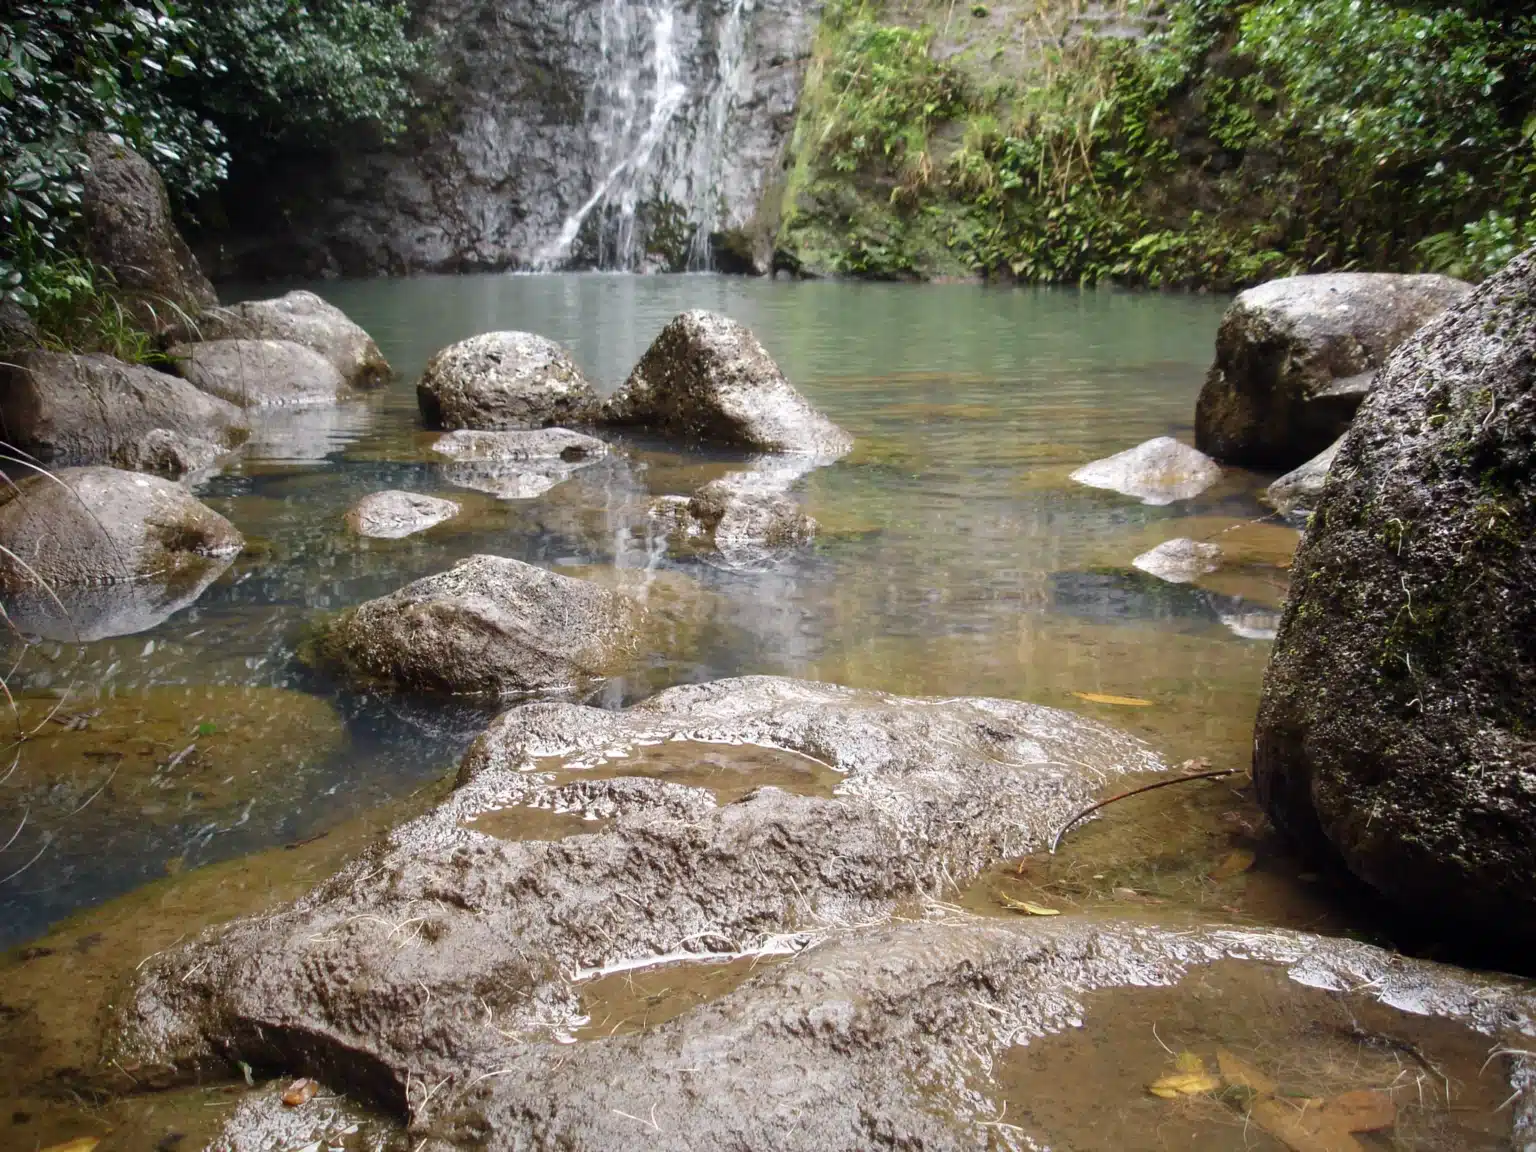 La'ie Falls: Waterfall Attraction in the town of Laie on Oahu